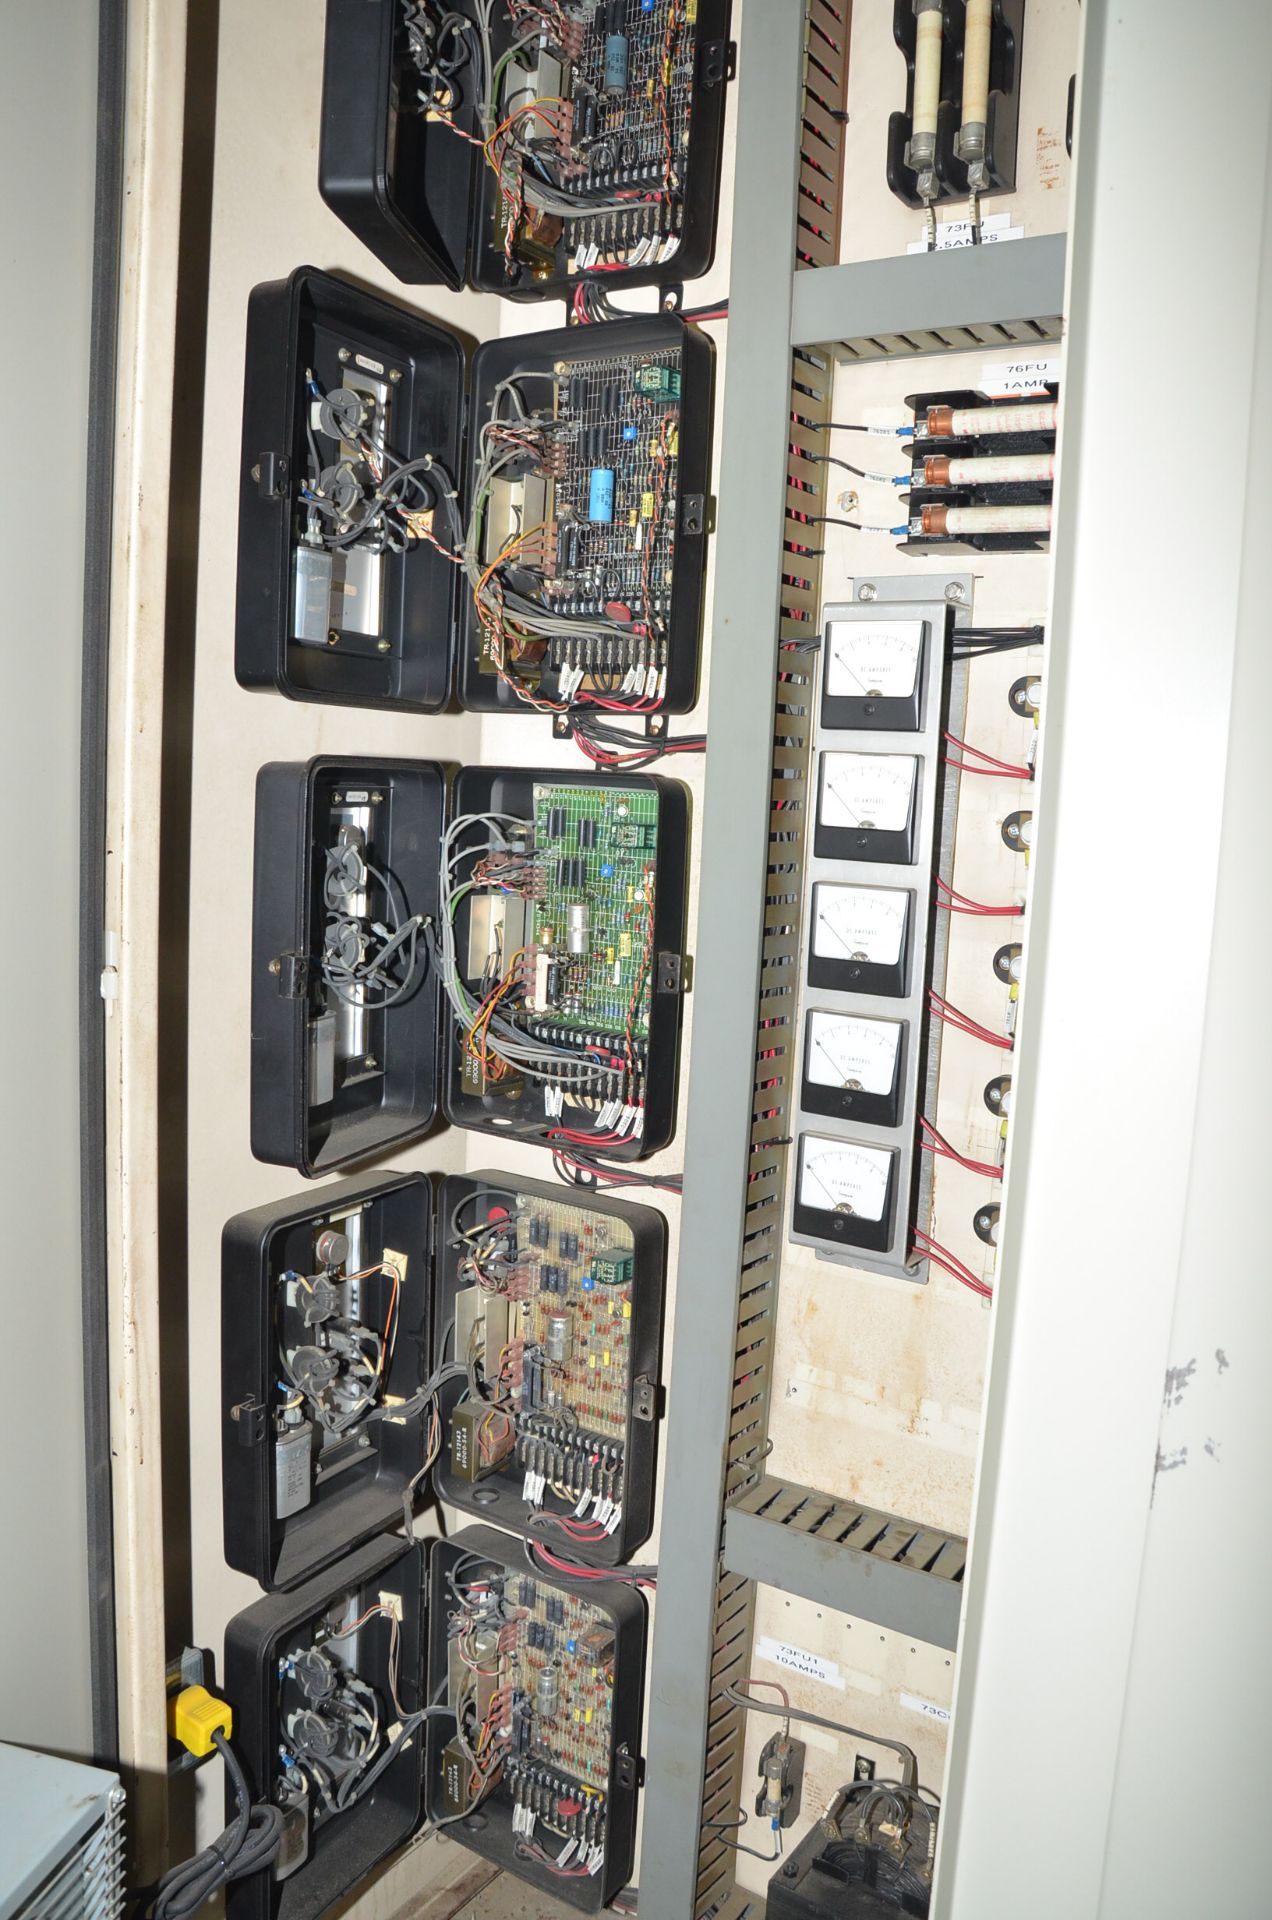 LOT/ PM5 DRIVE ROOM CABINETS CONSISTING OF 6-BANK CONTROL CABINETS WITH REMAINING COMPONENTS [ - Image 6 of 6